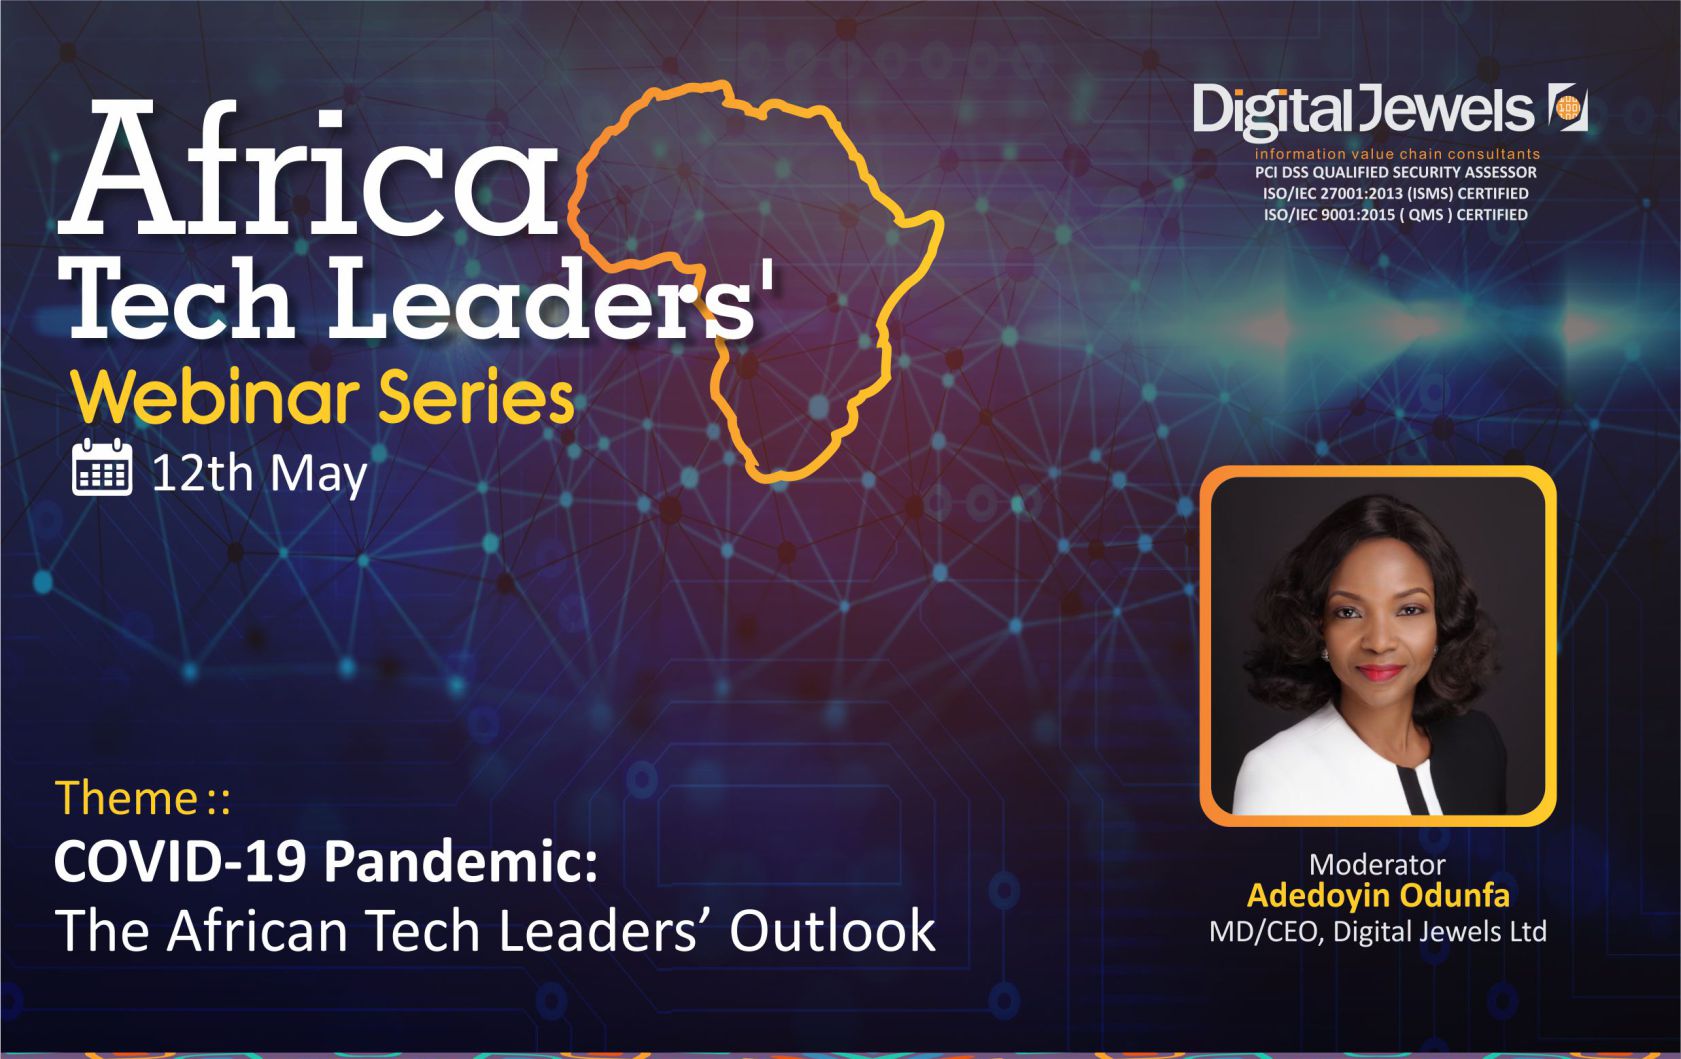 The African Tech Leaders Series